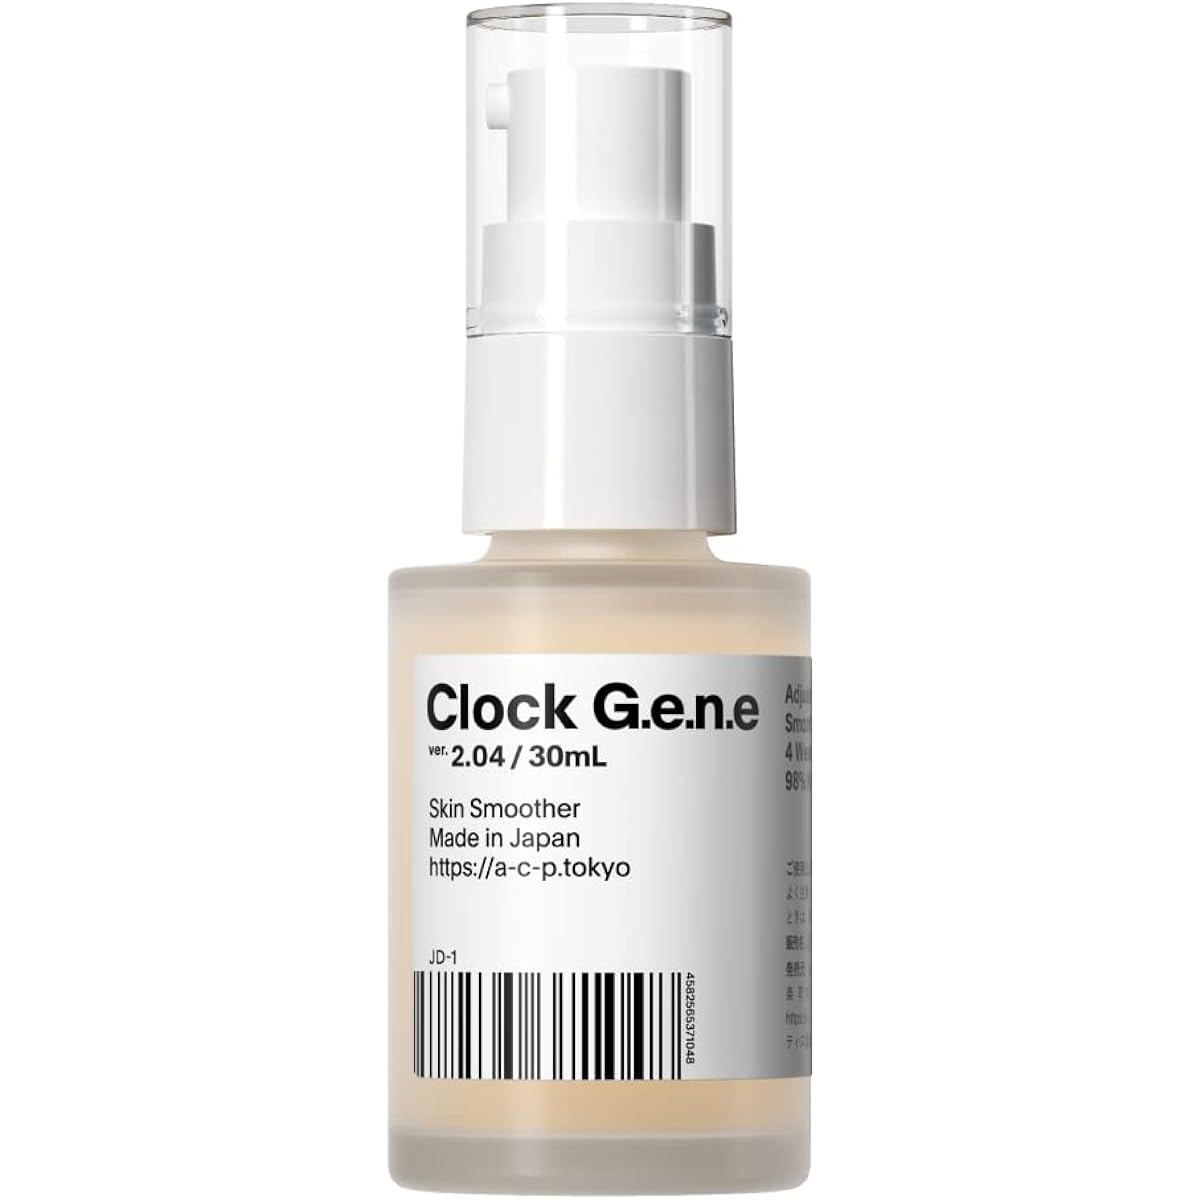 [Lead to healthy skin] Clock G.e.n.e AGILE COSMETICS PROJECT Serum, texture, firm skin, sensitive skin, dry skin, smooth, Clock G.e.n.e AGILE COSMETICS PROJECT